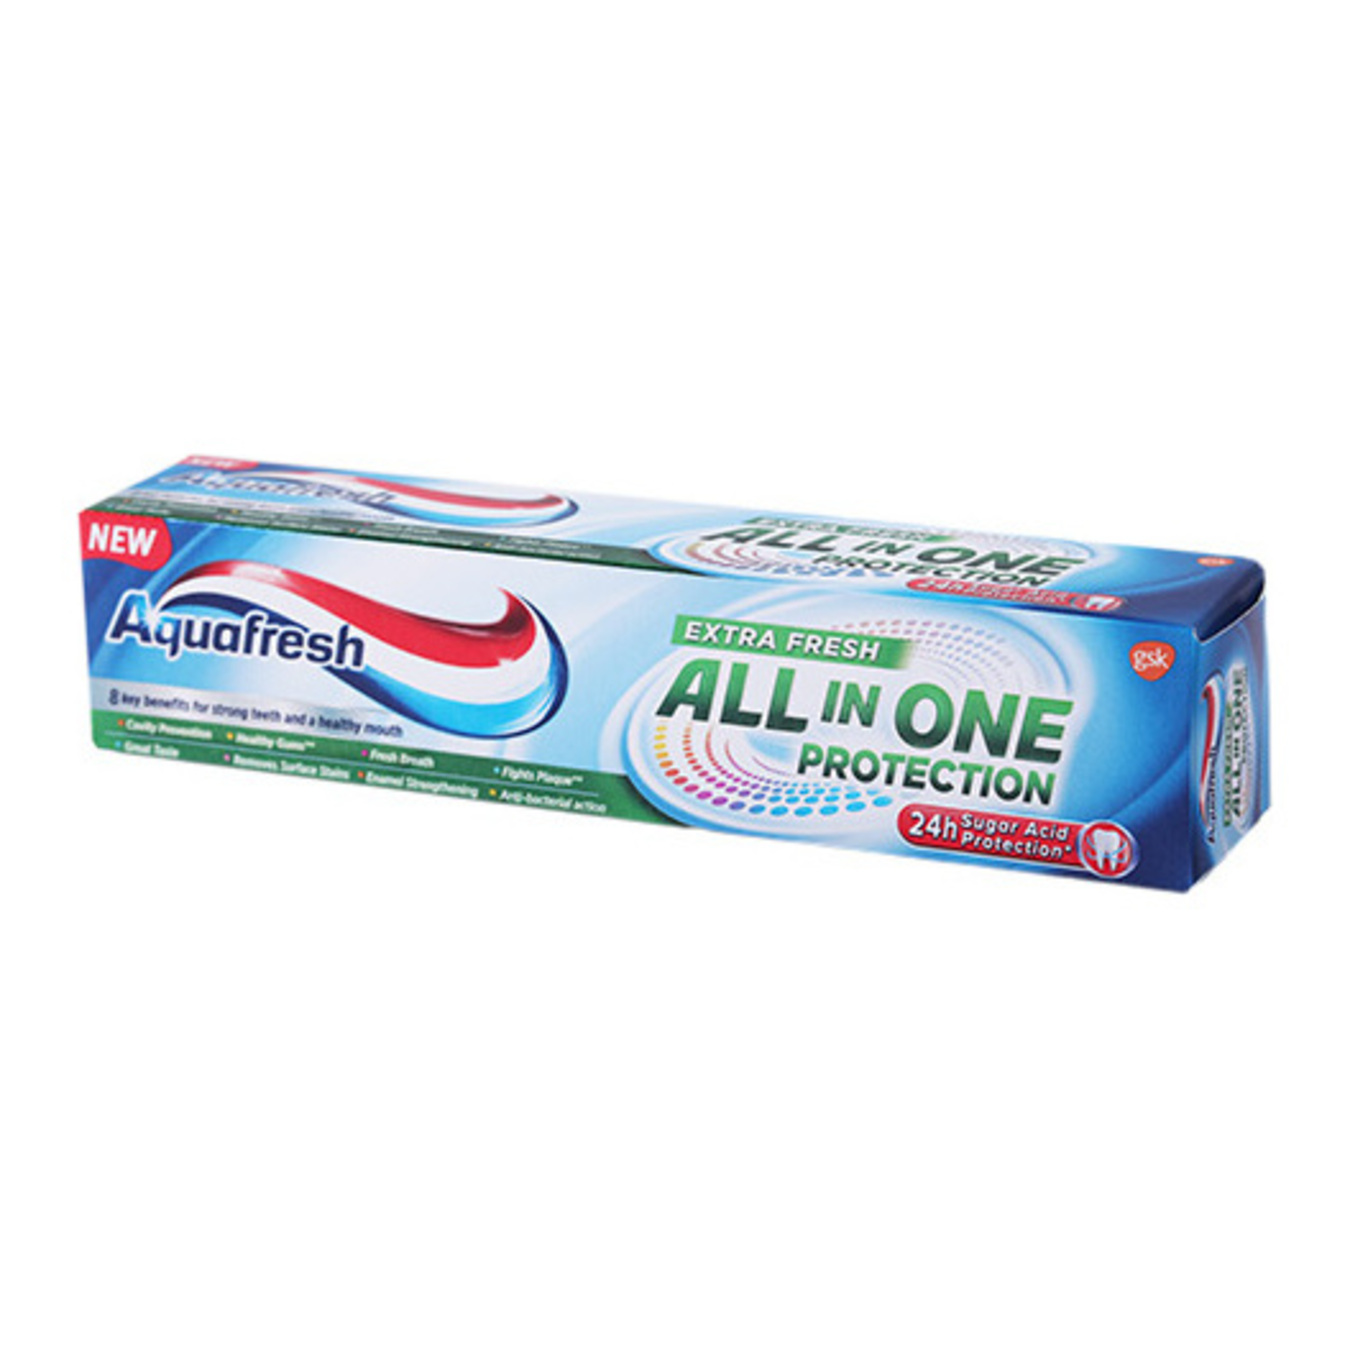 Aquafresh All in One Toothpaste extra freshness 100ml